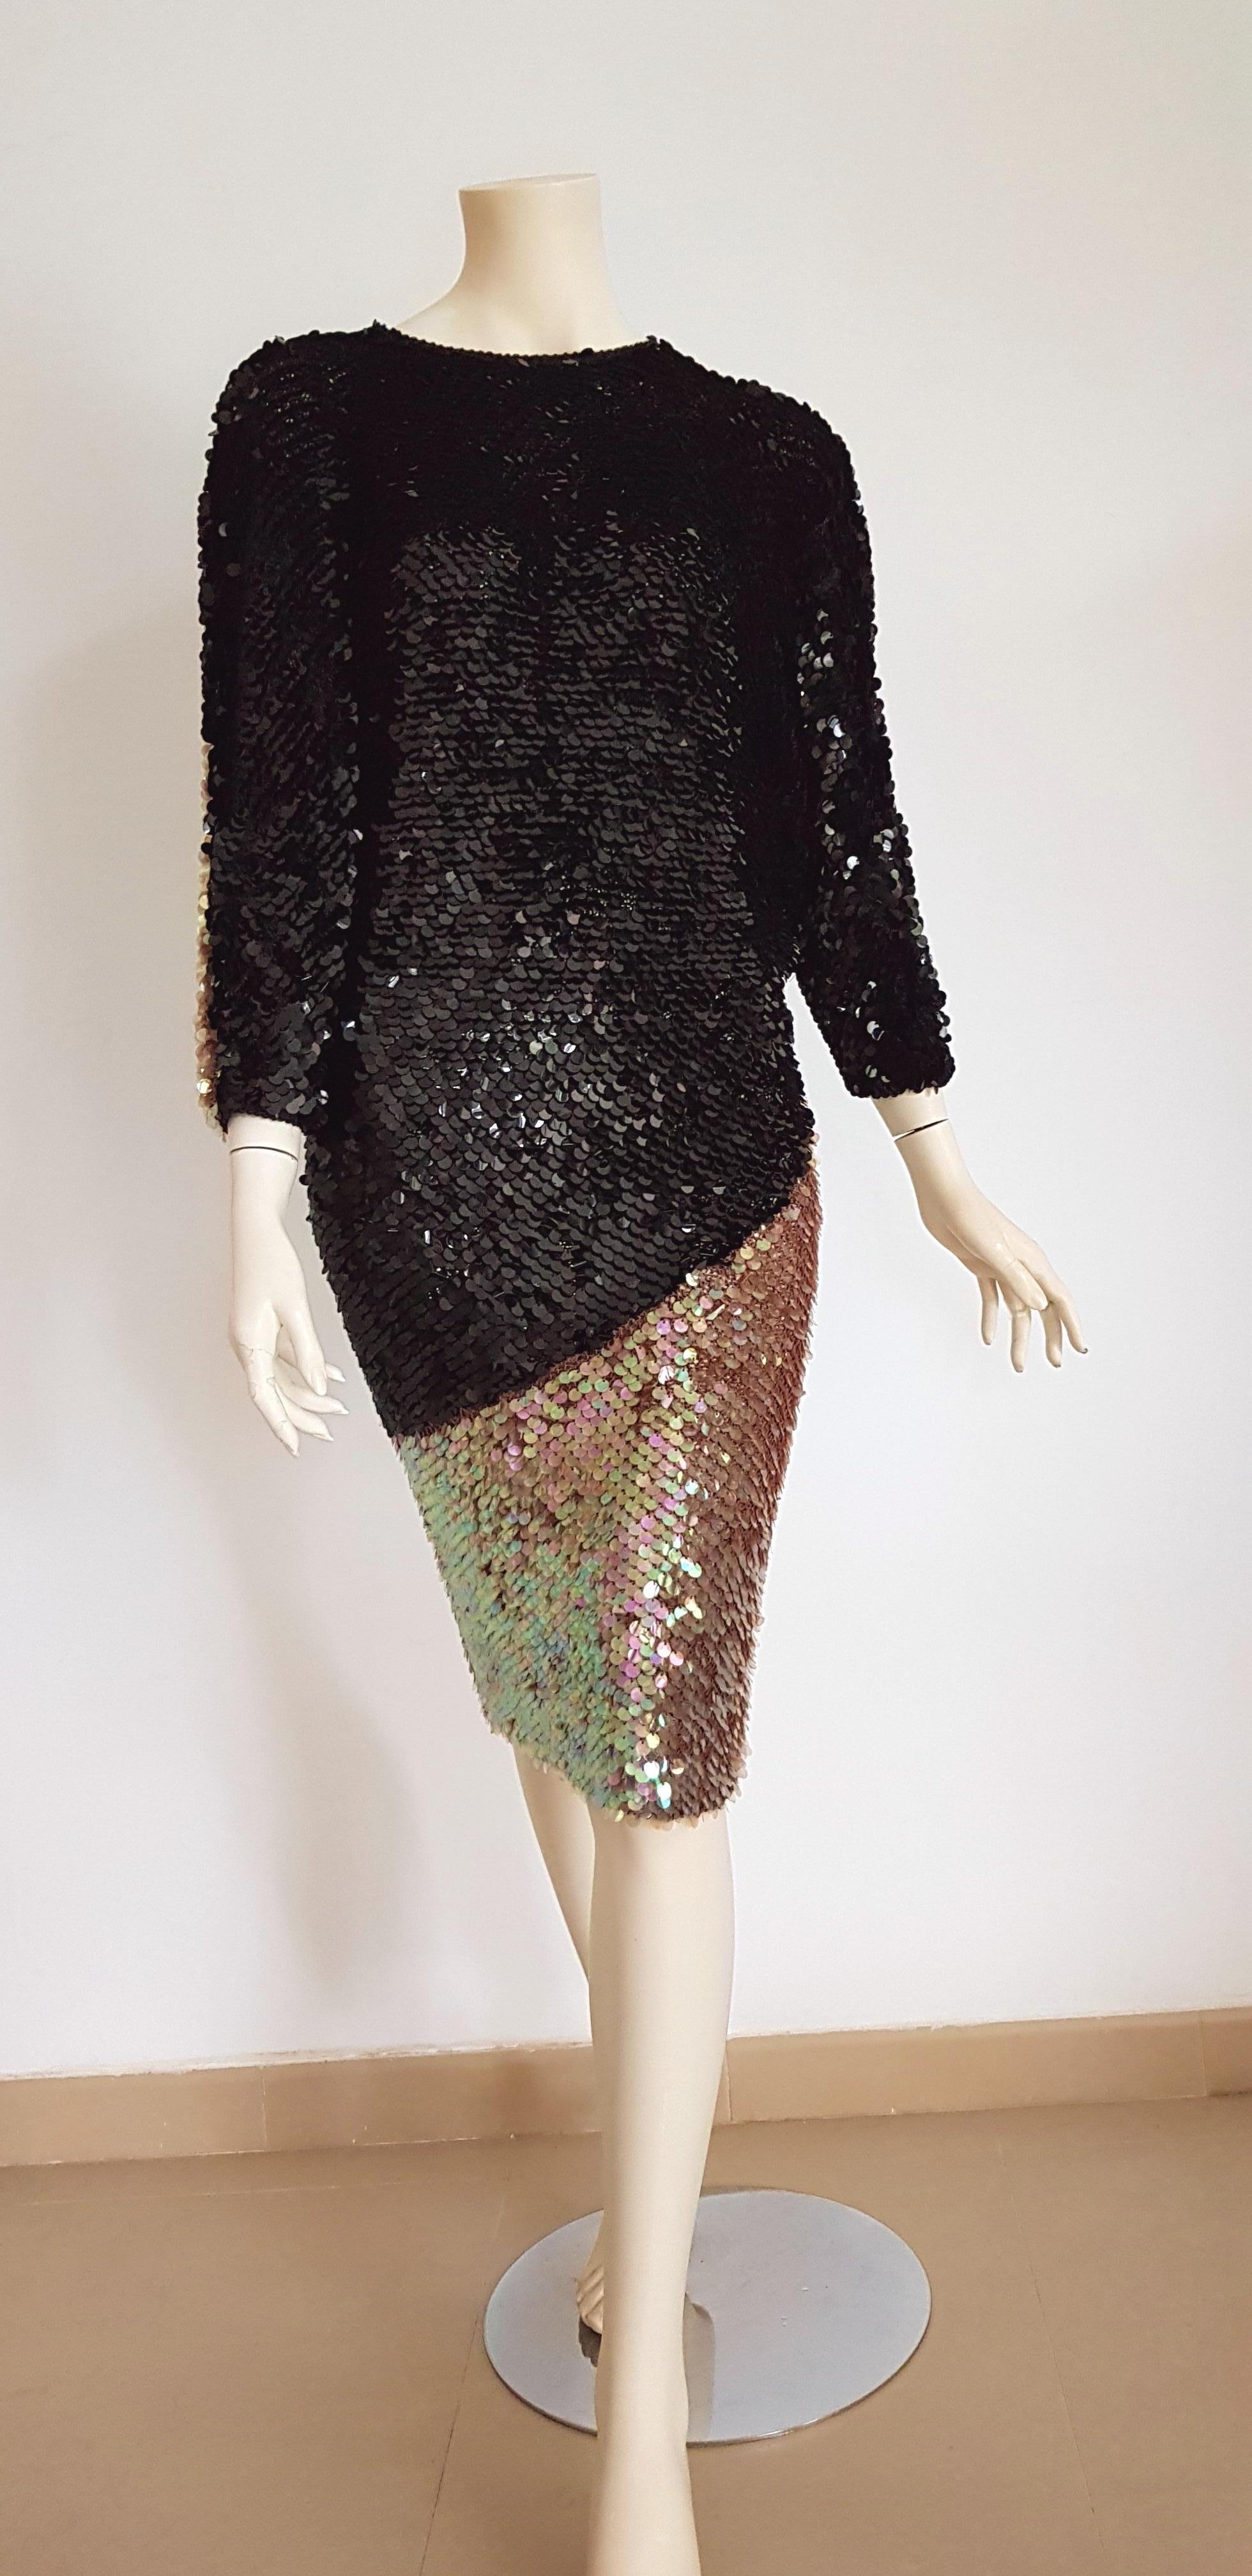 CHANEL Haute Couture covered with sequins on silk knit, black and pearl gown dress - Unworn, New.

SIZE: equivalent to about Small / Medium, please review approx measurements as follows in cm: lenght 101, chest elastic adjustable, bust elastic